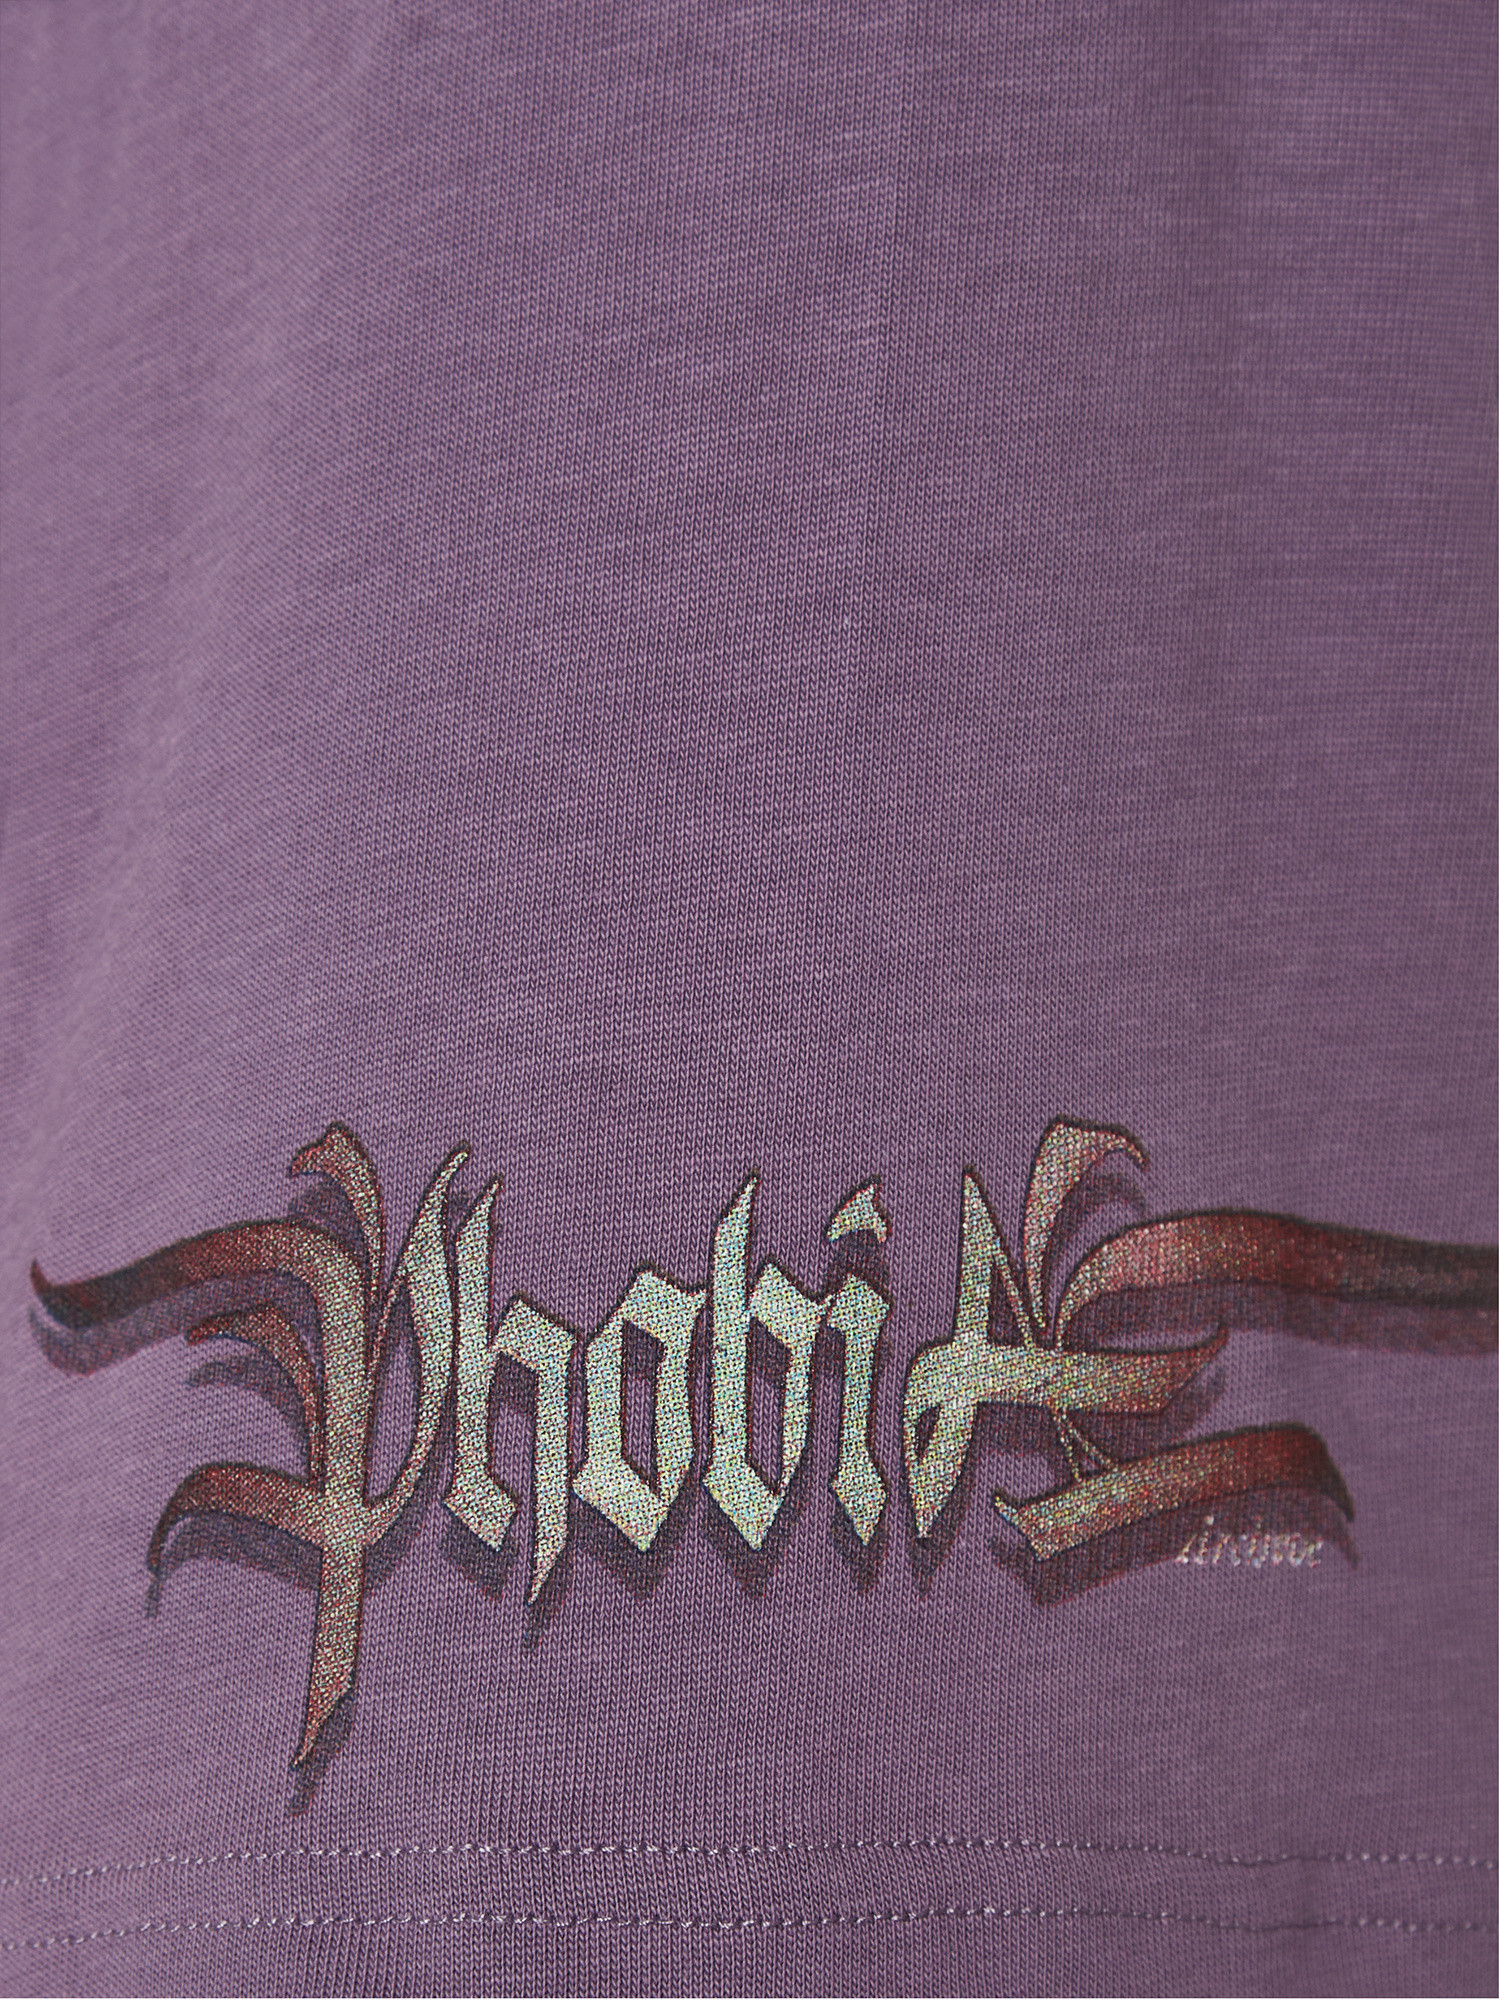 Phobia - T-shirt in cotone con stampa squalo, Viola, large image number 2